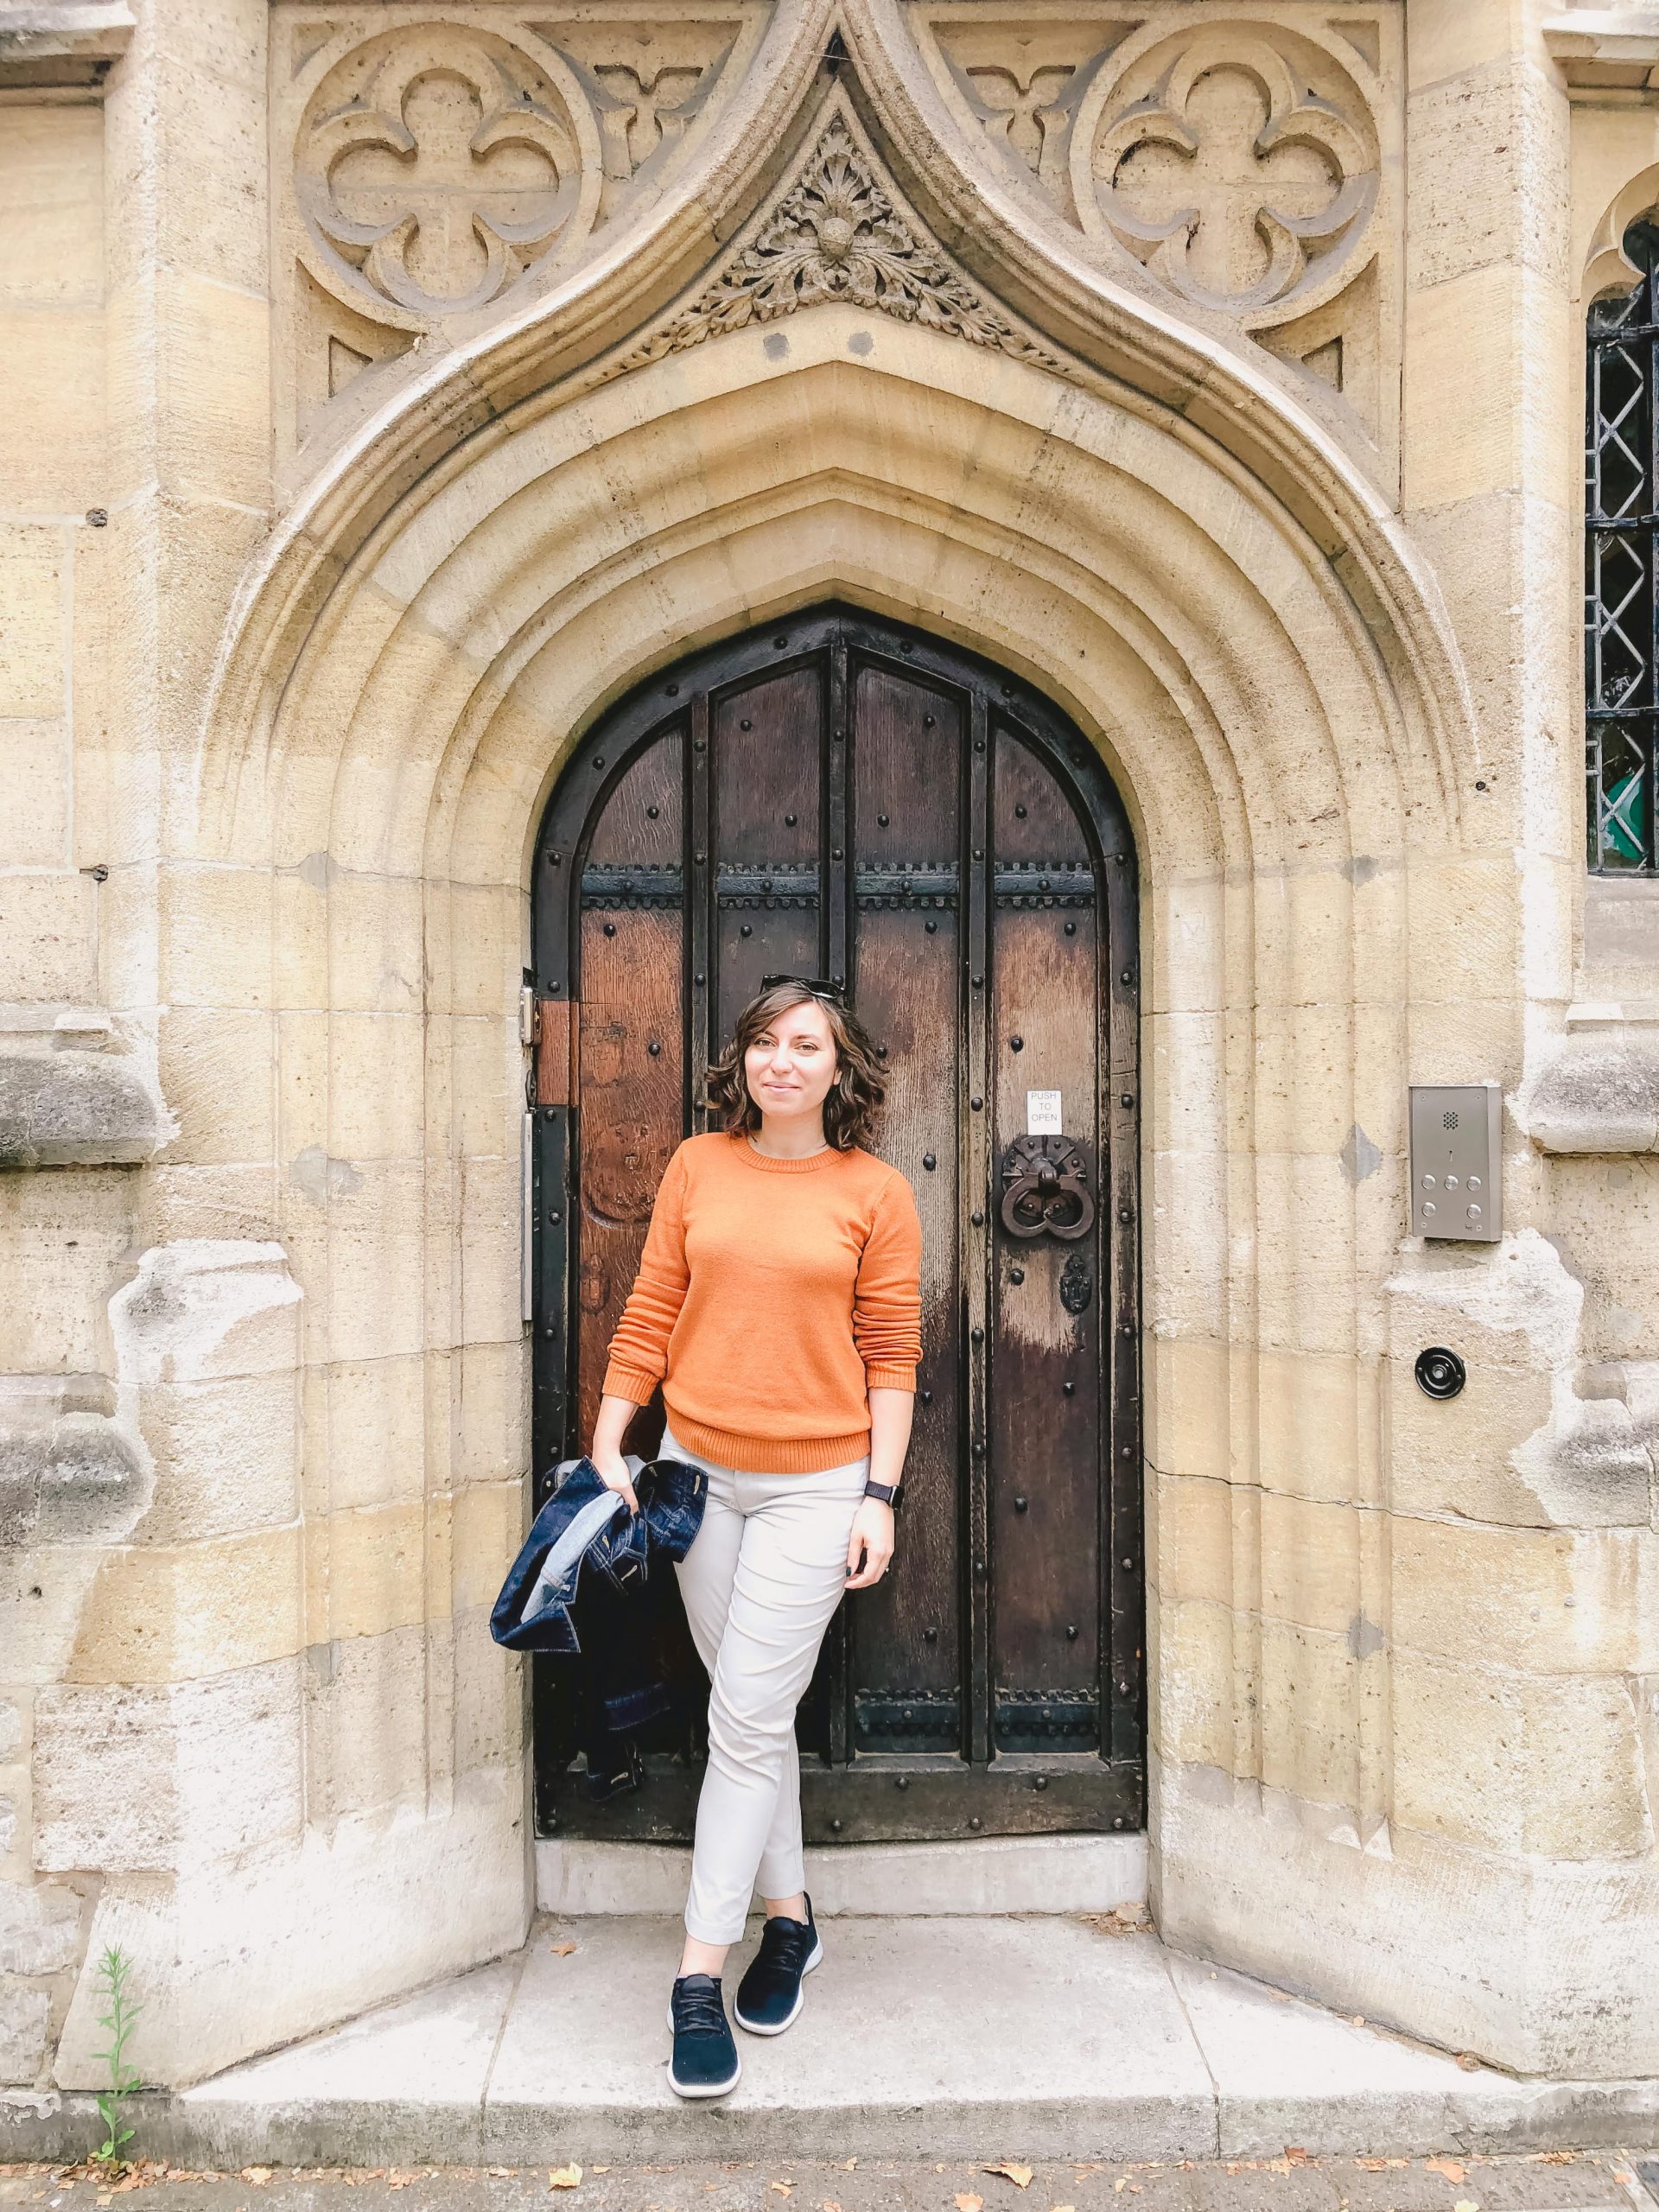 Cory wearing her Palma chinos from Bluffworks in Oxford